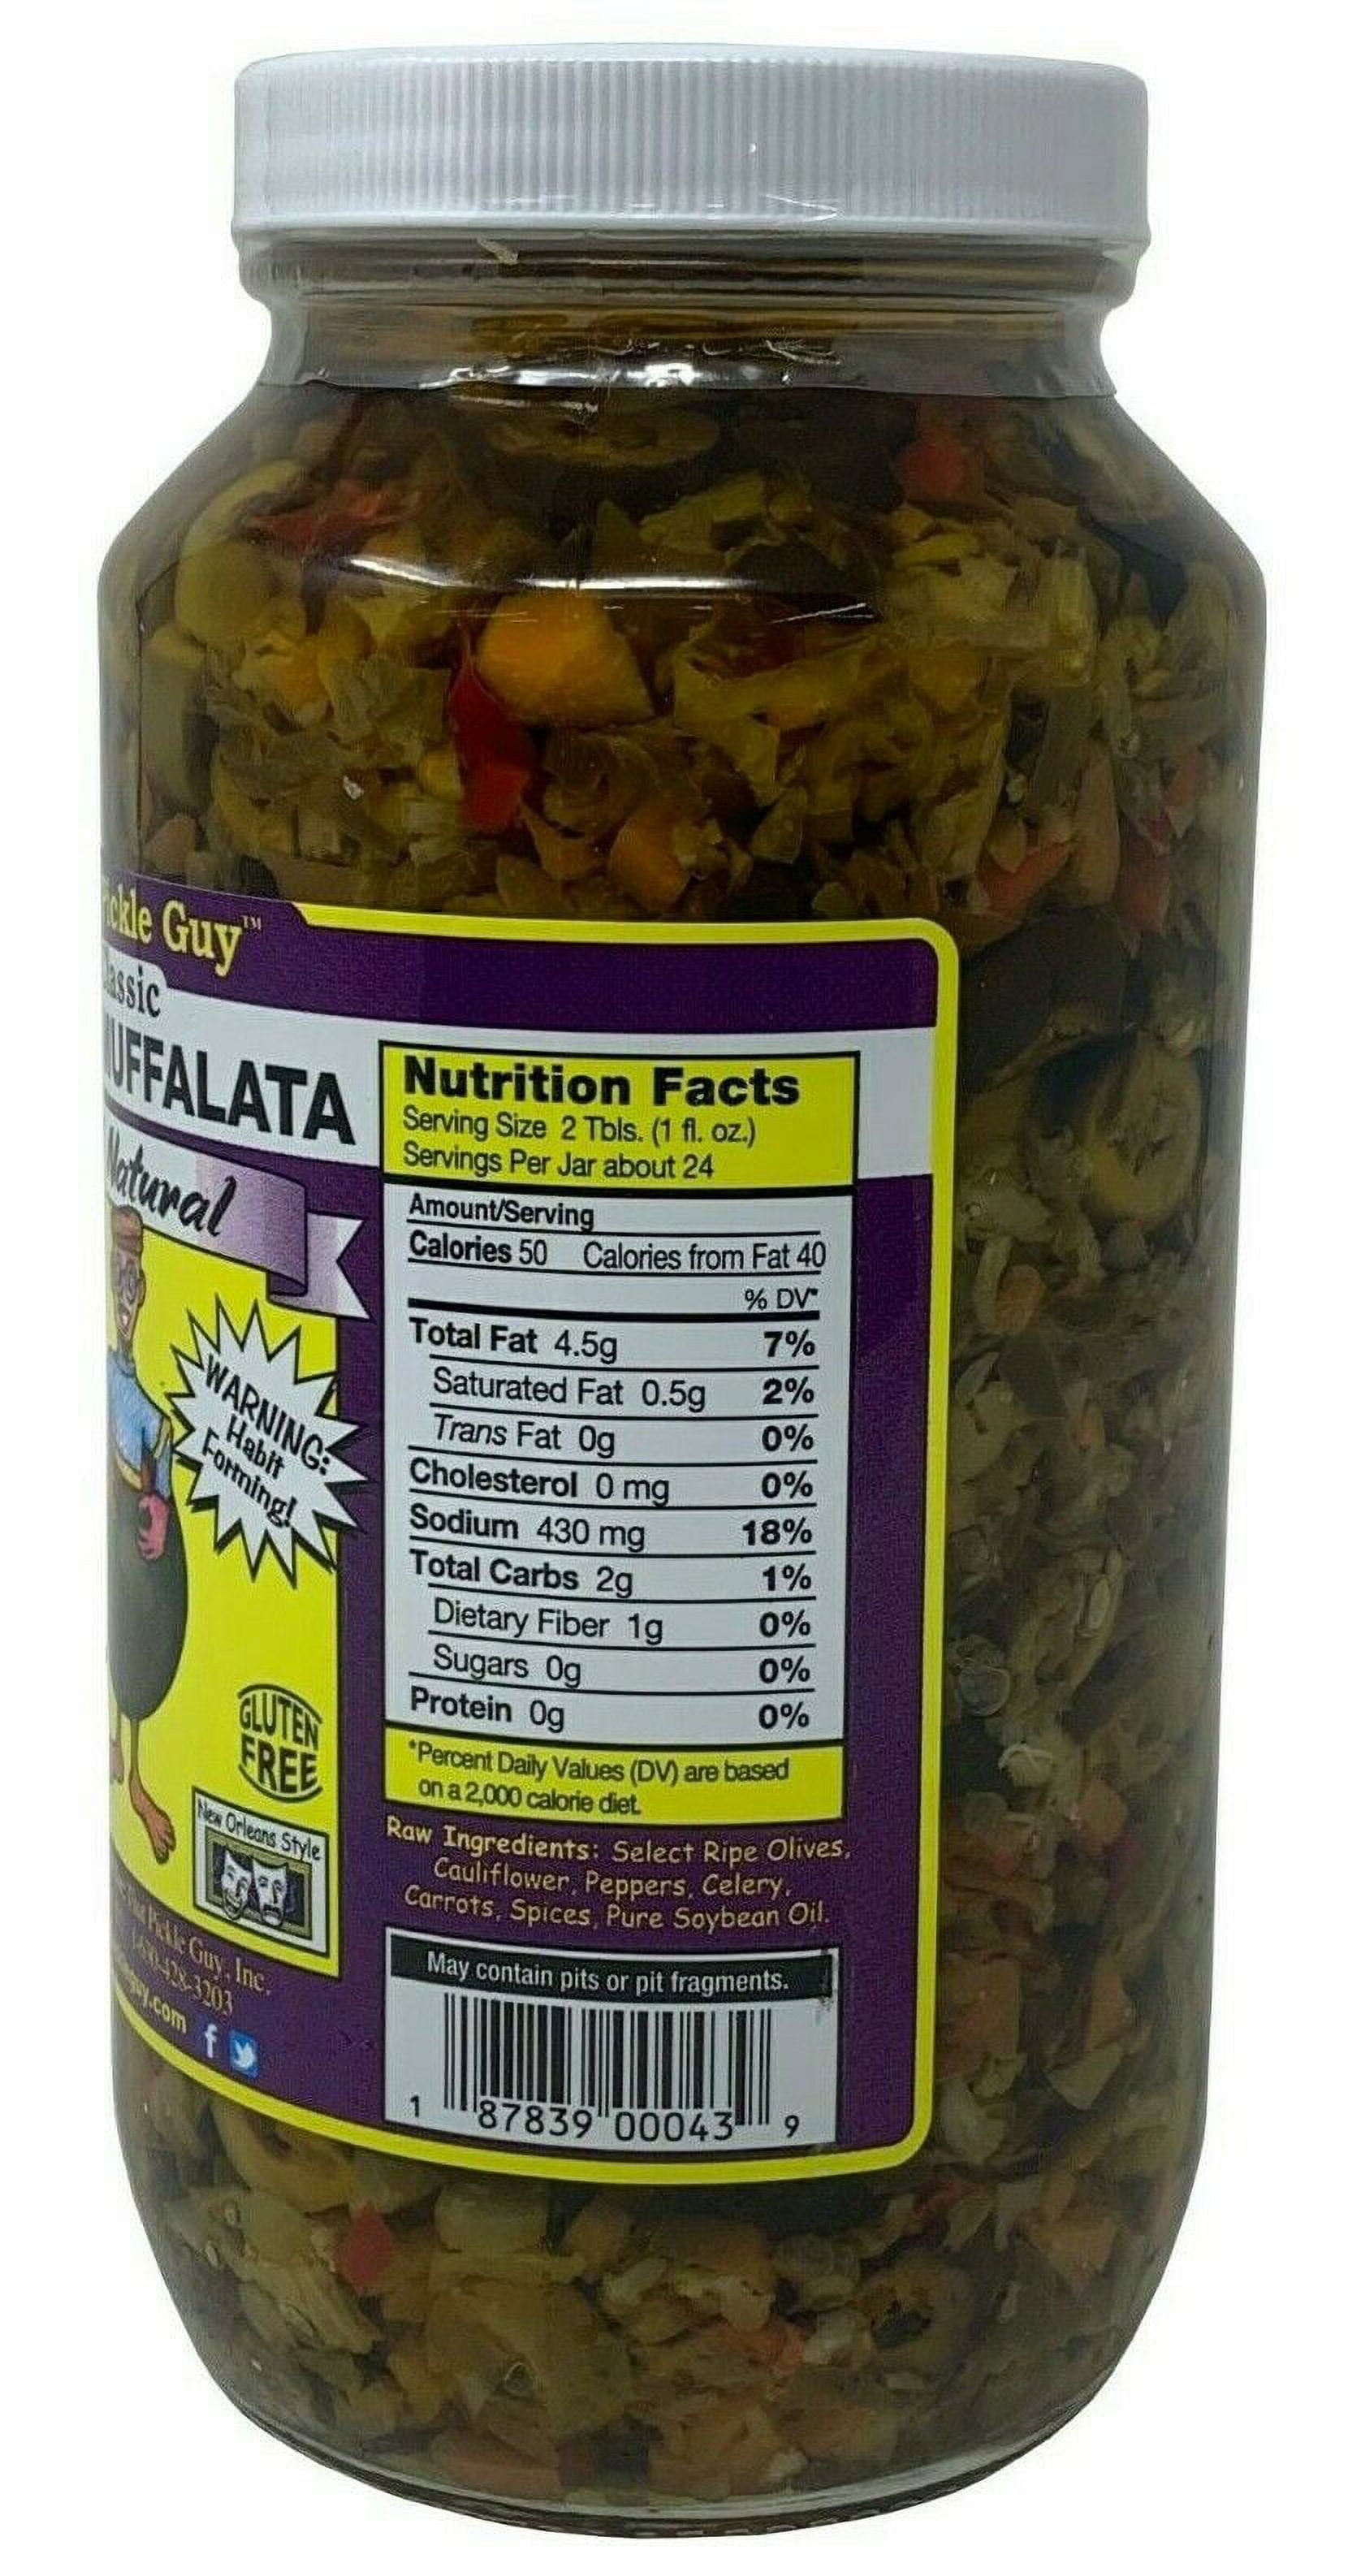 That Pickle Guy Spicy Olive Muffalata Mix, 32 Oz